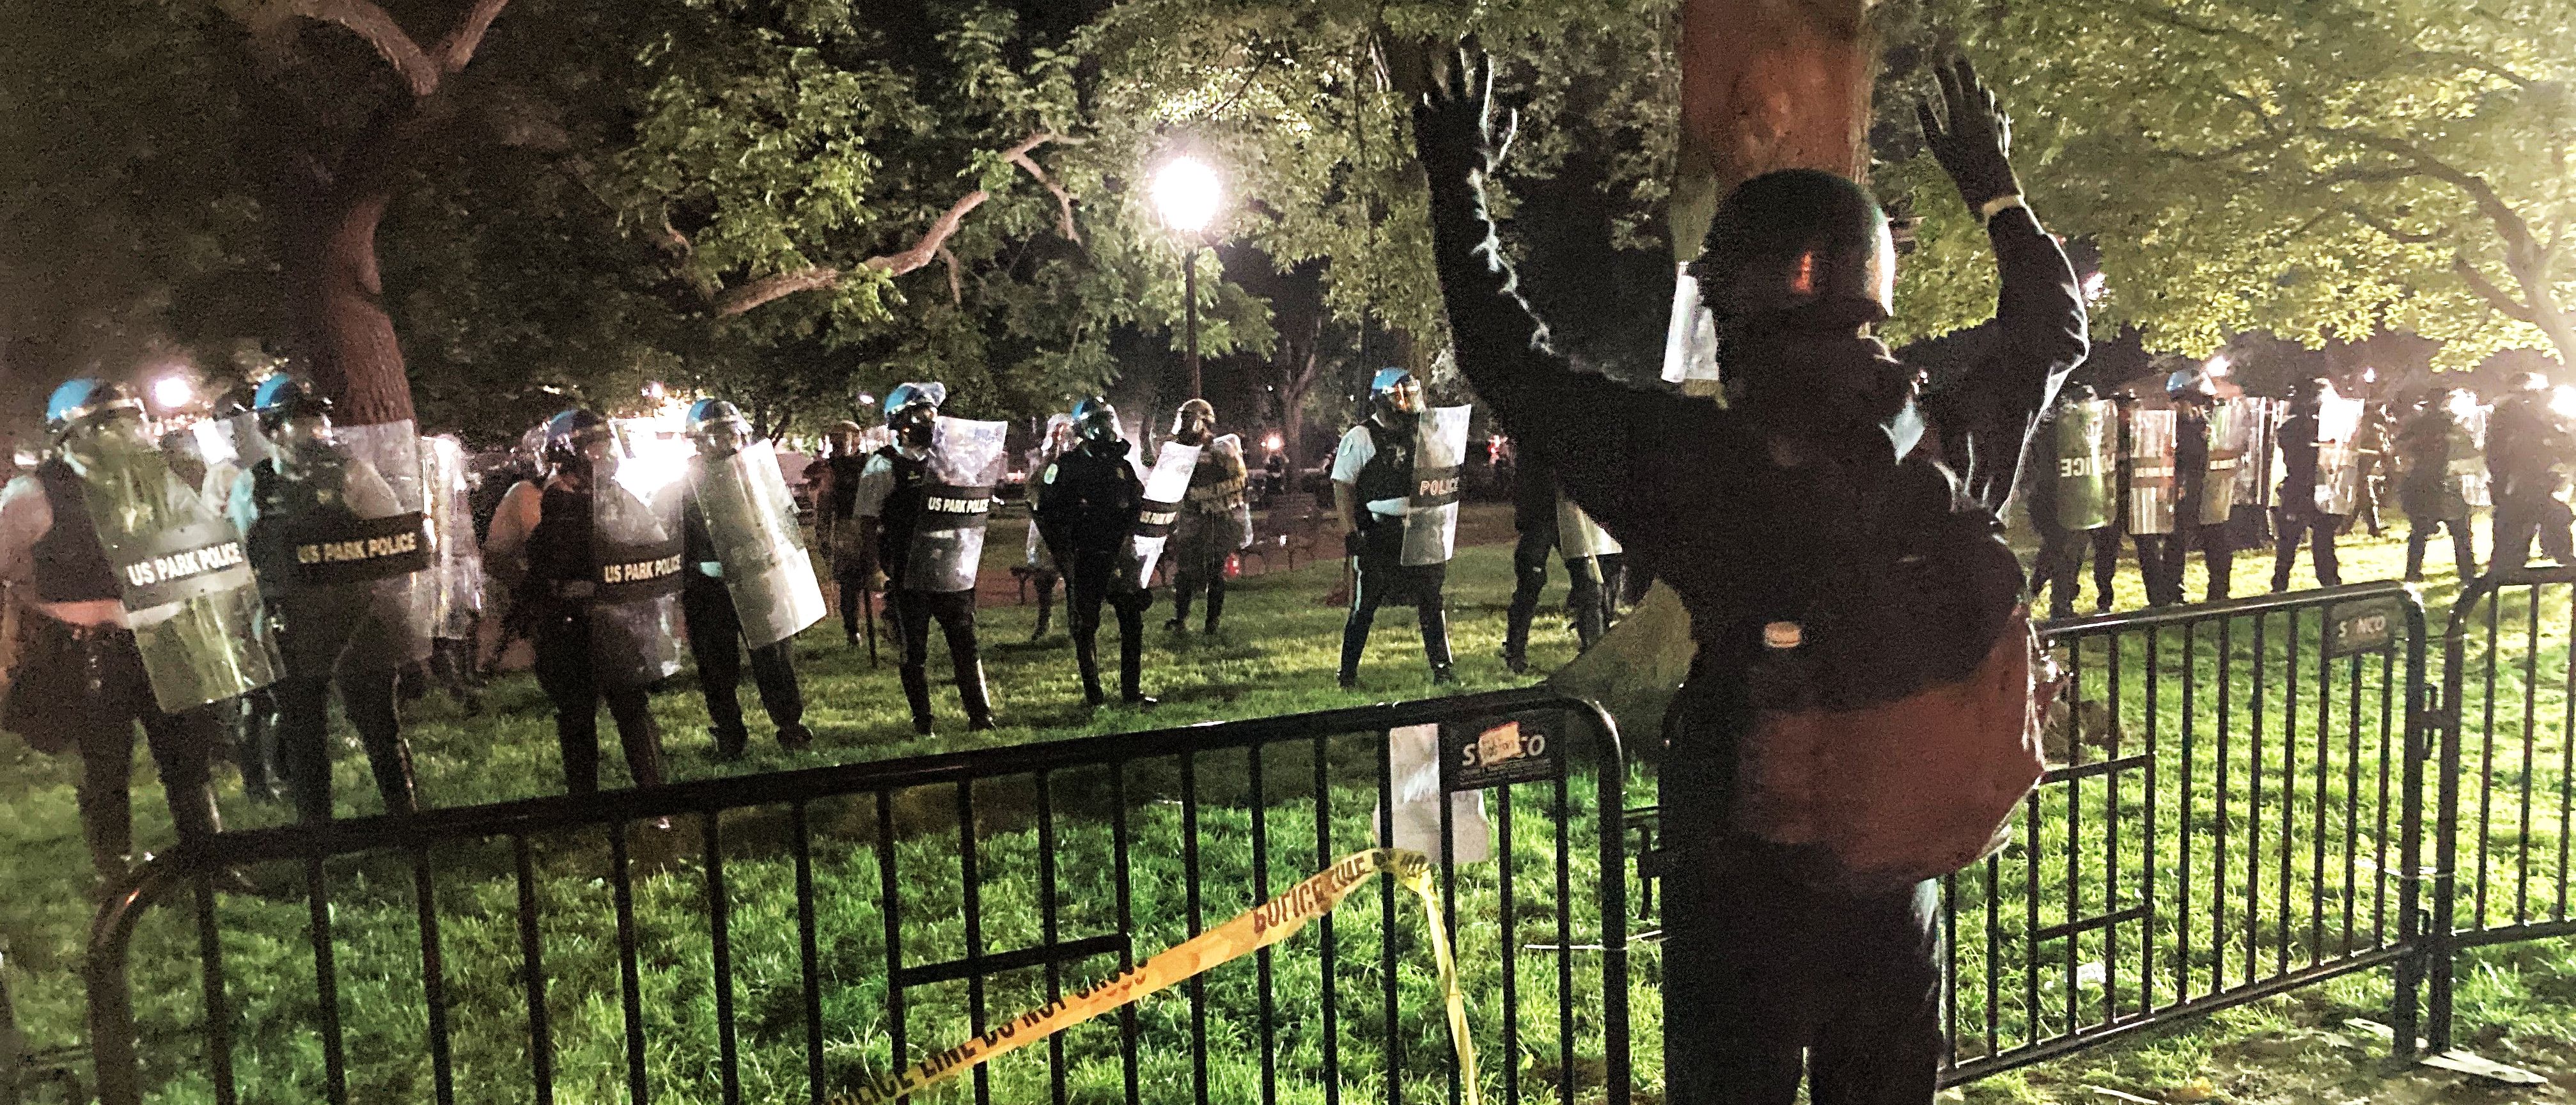 Lafayette Square has long been a place for protest, but the recent vandalism caused the White House to order it closed to the public for now. Tracy Lee.